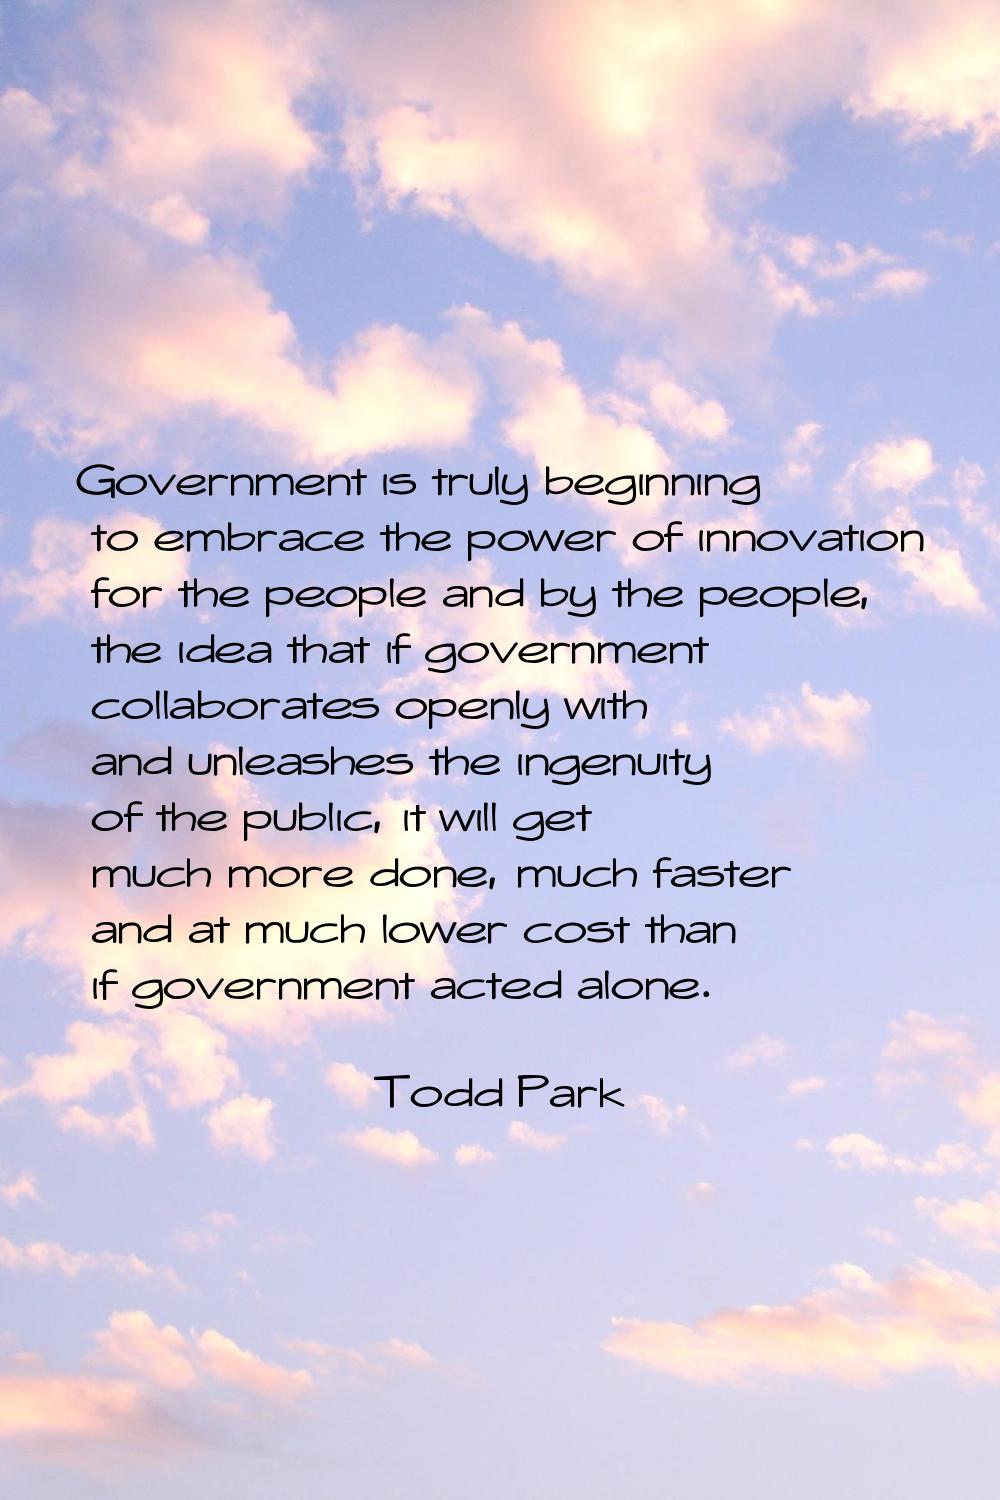 Government is truly beginning to embrace the power of innovation for the people and by the people, 